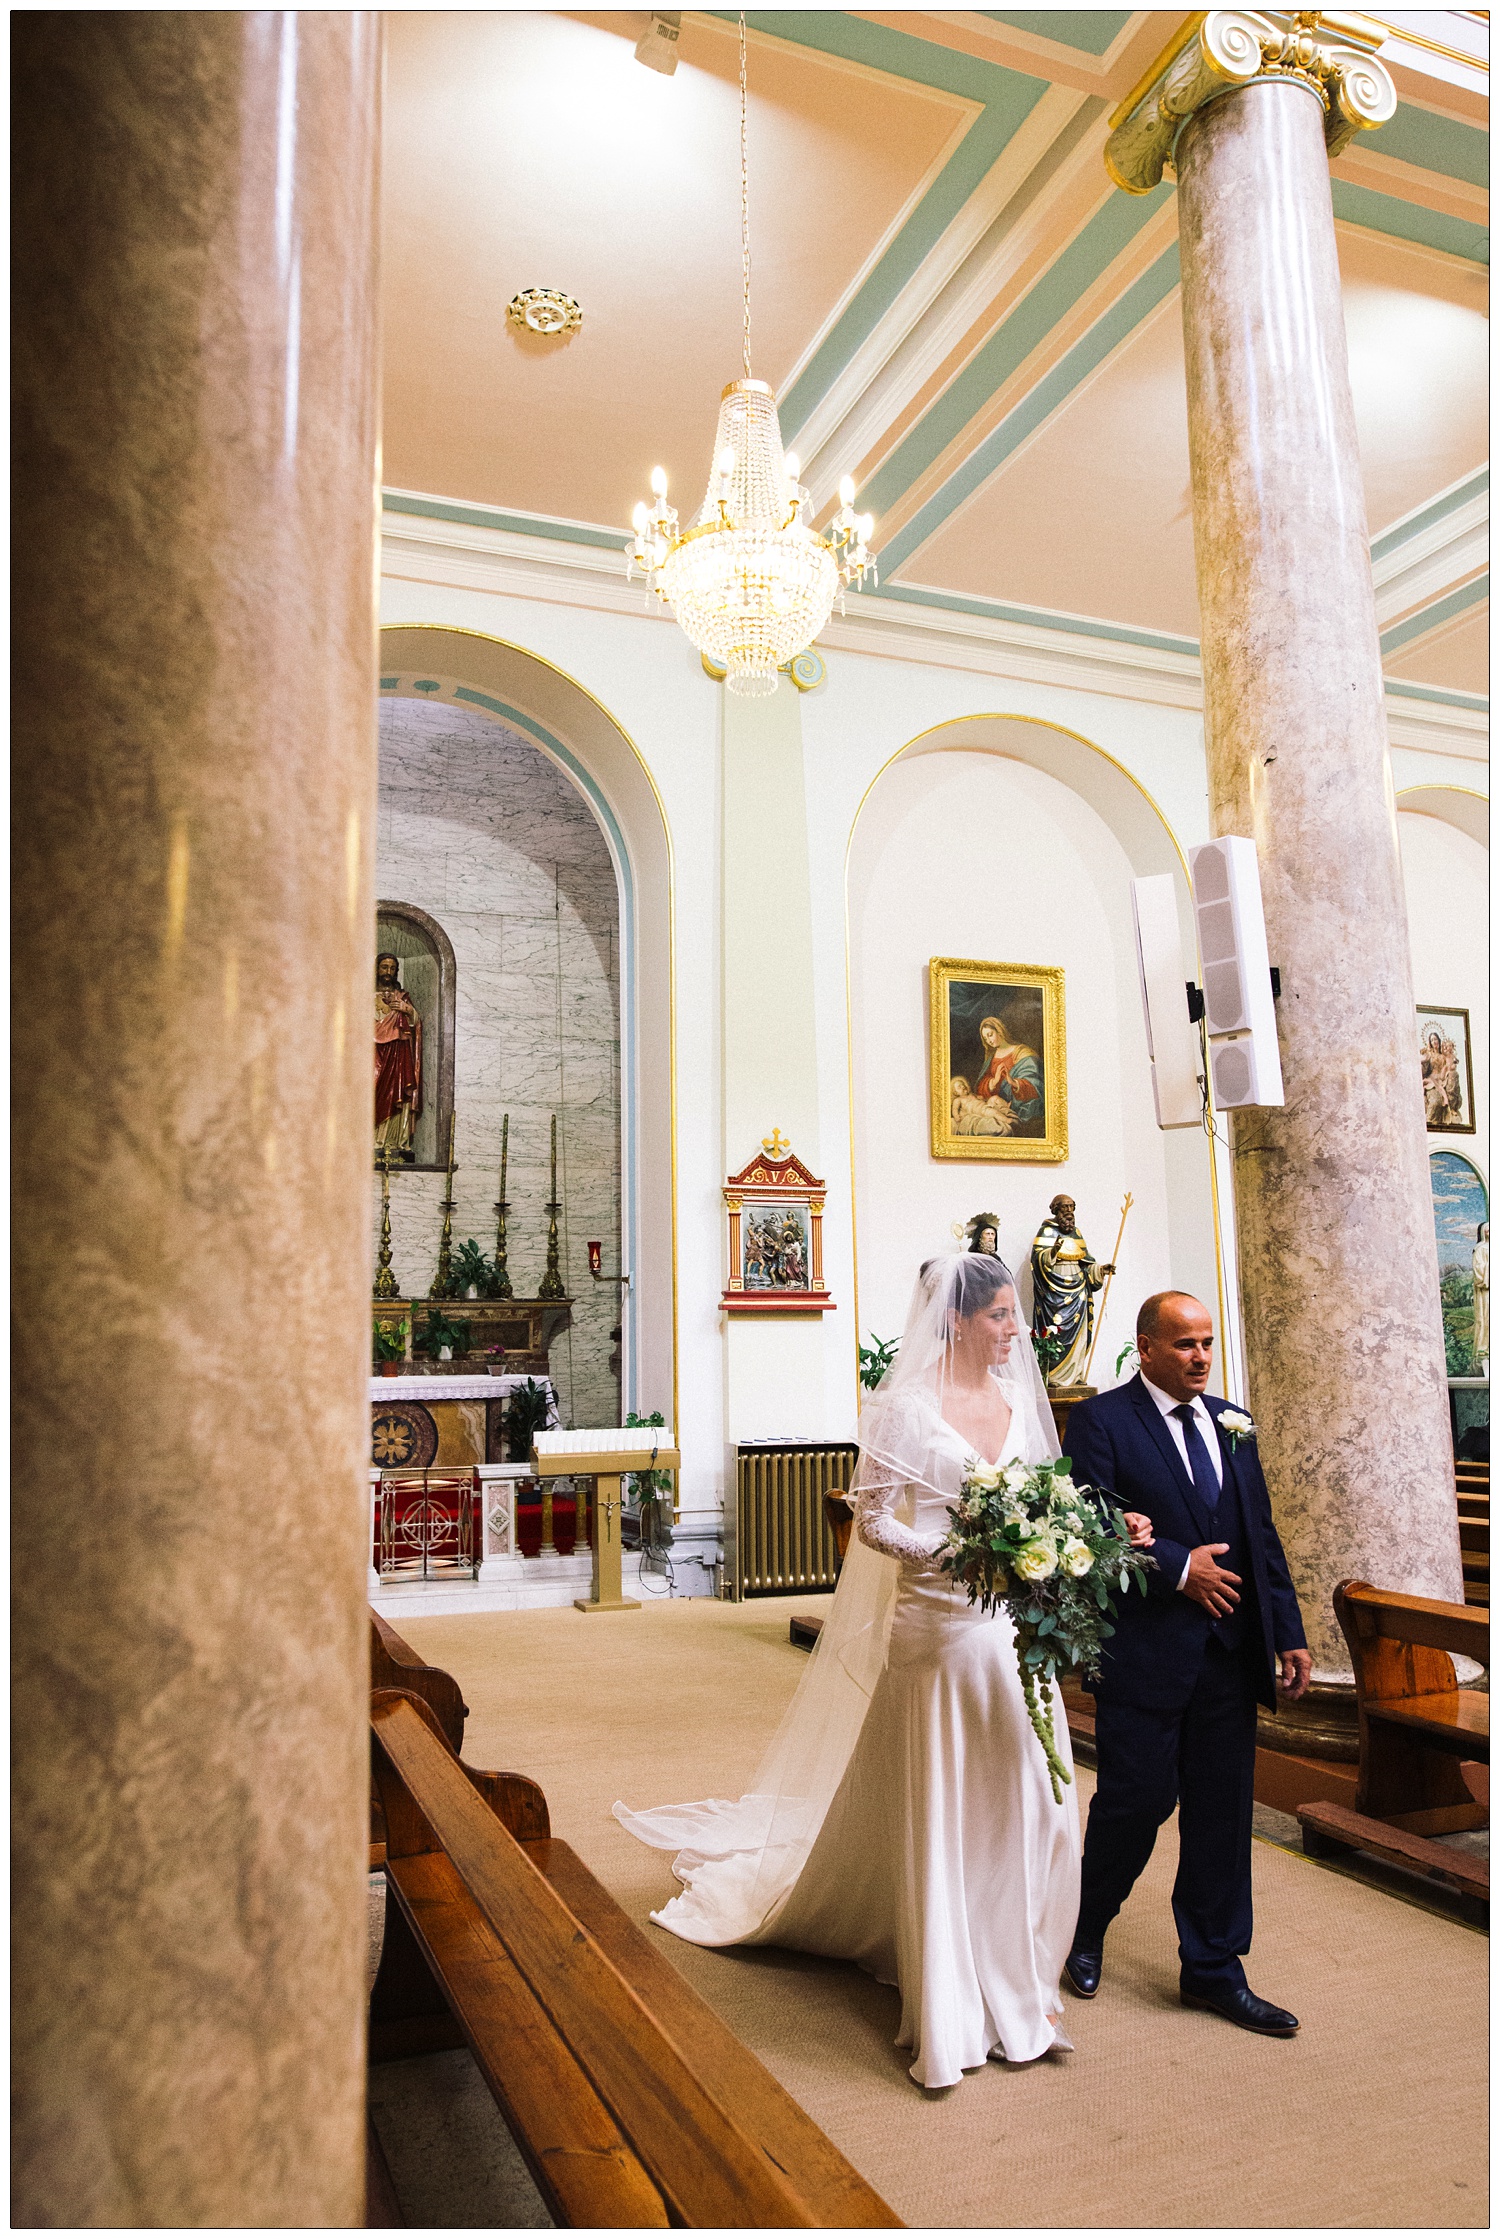 Bride and her father entering the St. Peter's Italian Church in Clerkenwell.